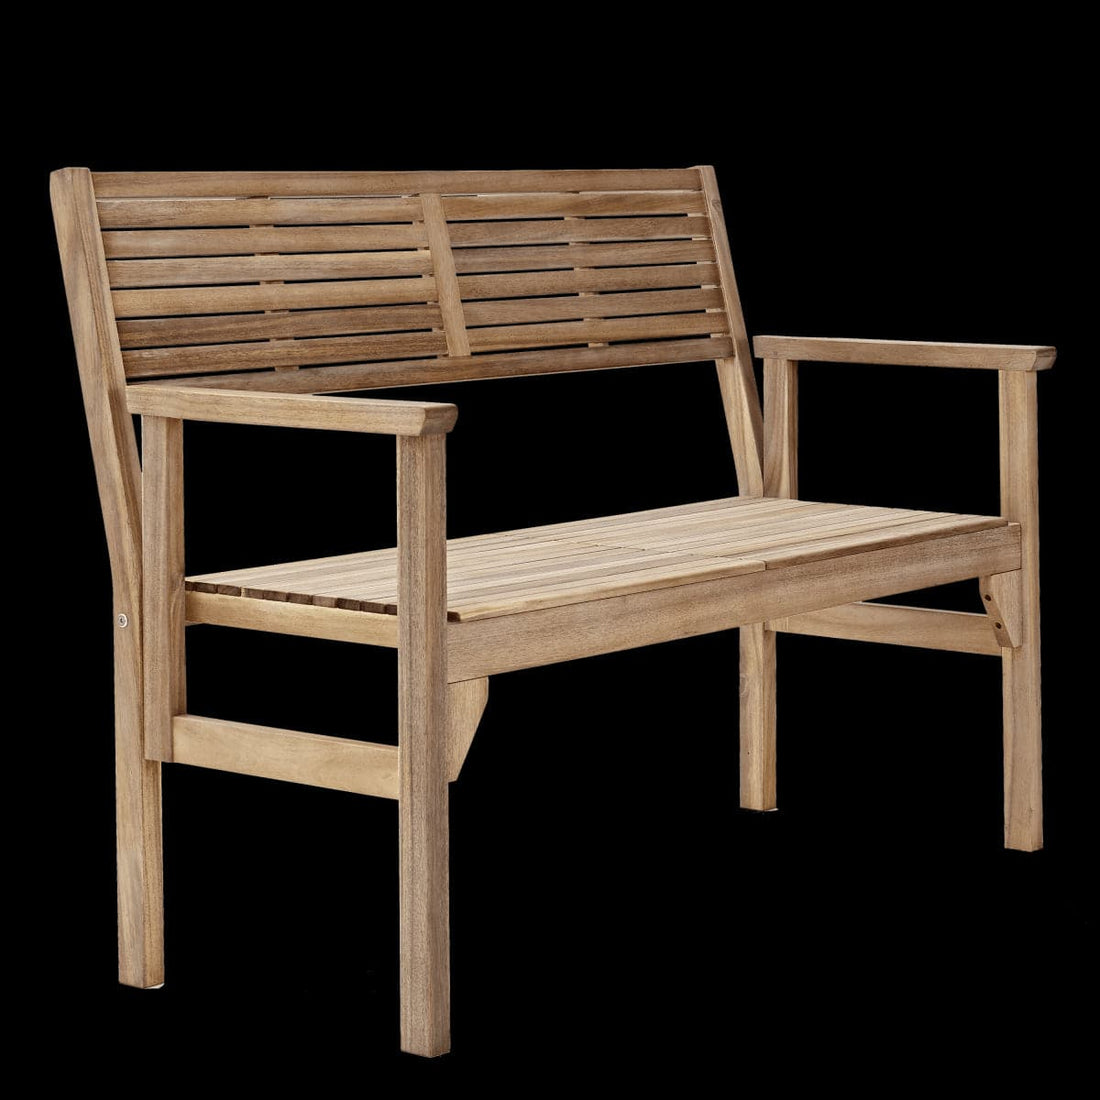 SOLIS ORIGAMI NATERIAL 2 SEATER ACACIA WOOD BENCH WITH ARMRESTS 55.2X120XH89.5 - best price from Maltashopper.com BR500011220